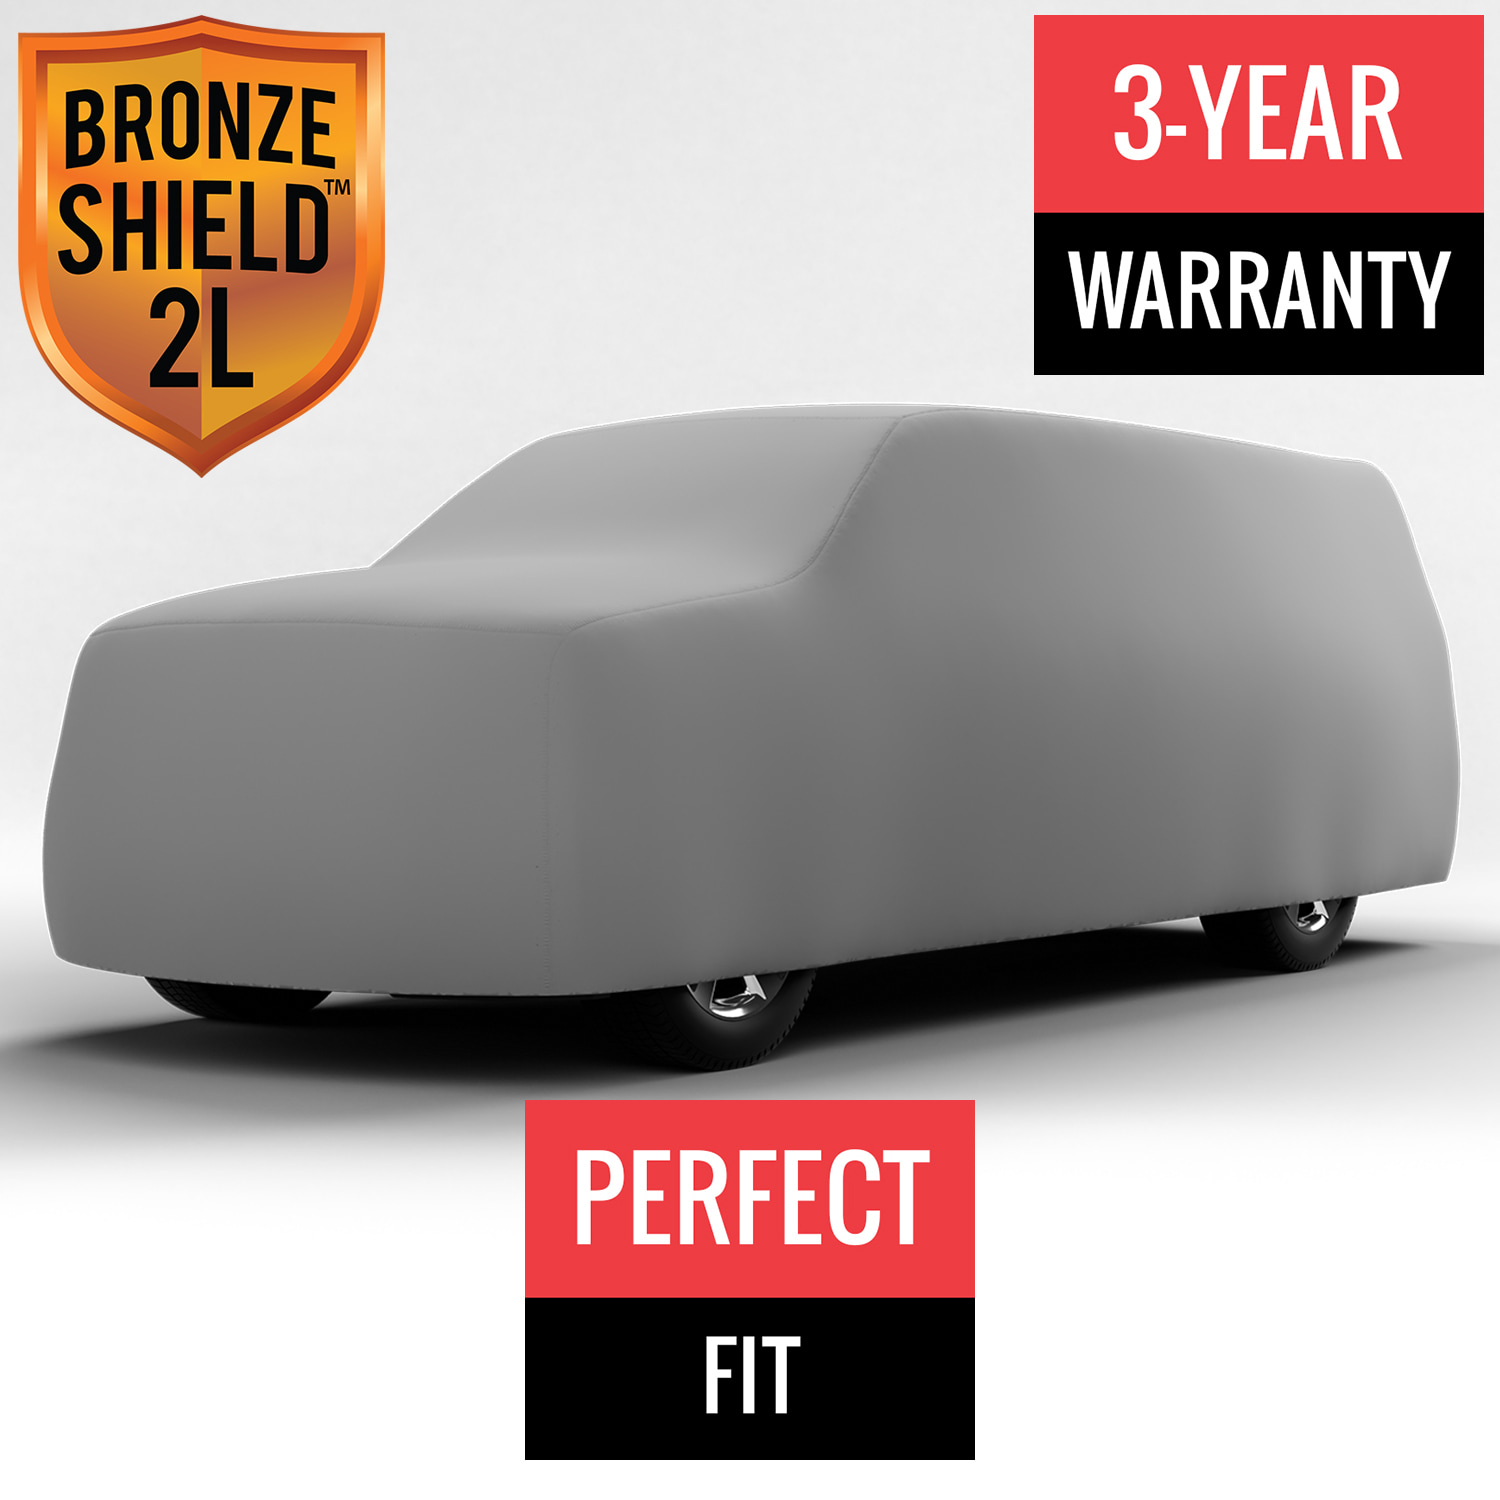 Bronze Shield 2L - Car Cover for Toyota Pickup 1984 Regular Cab Pickup Long Bed with Camper Shell